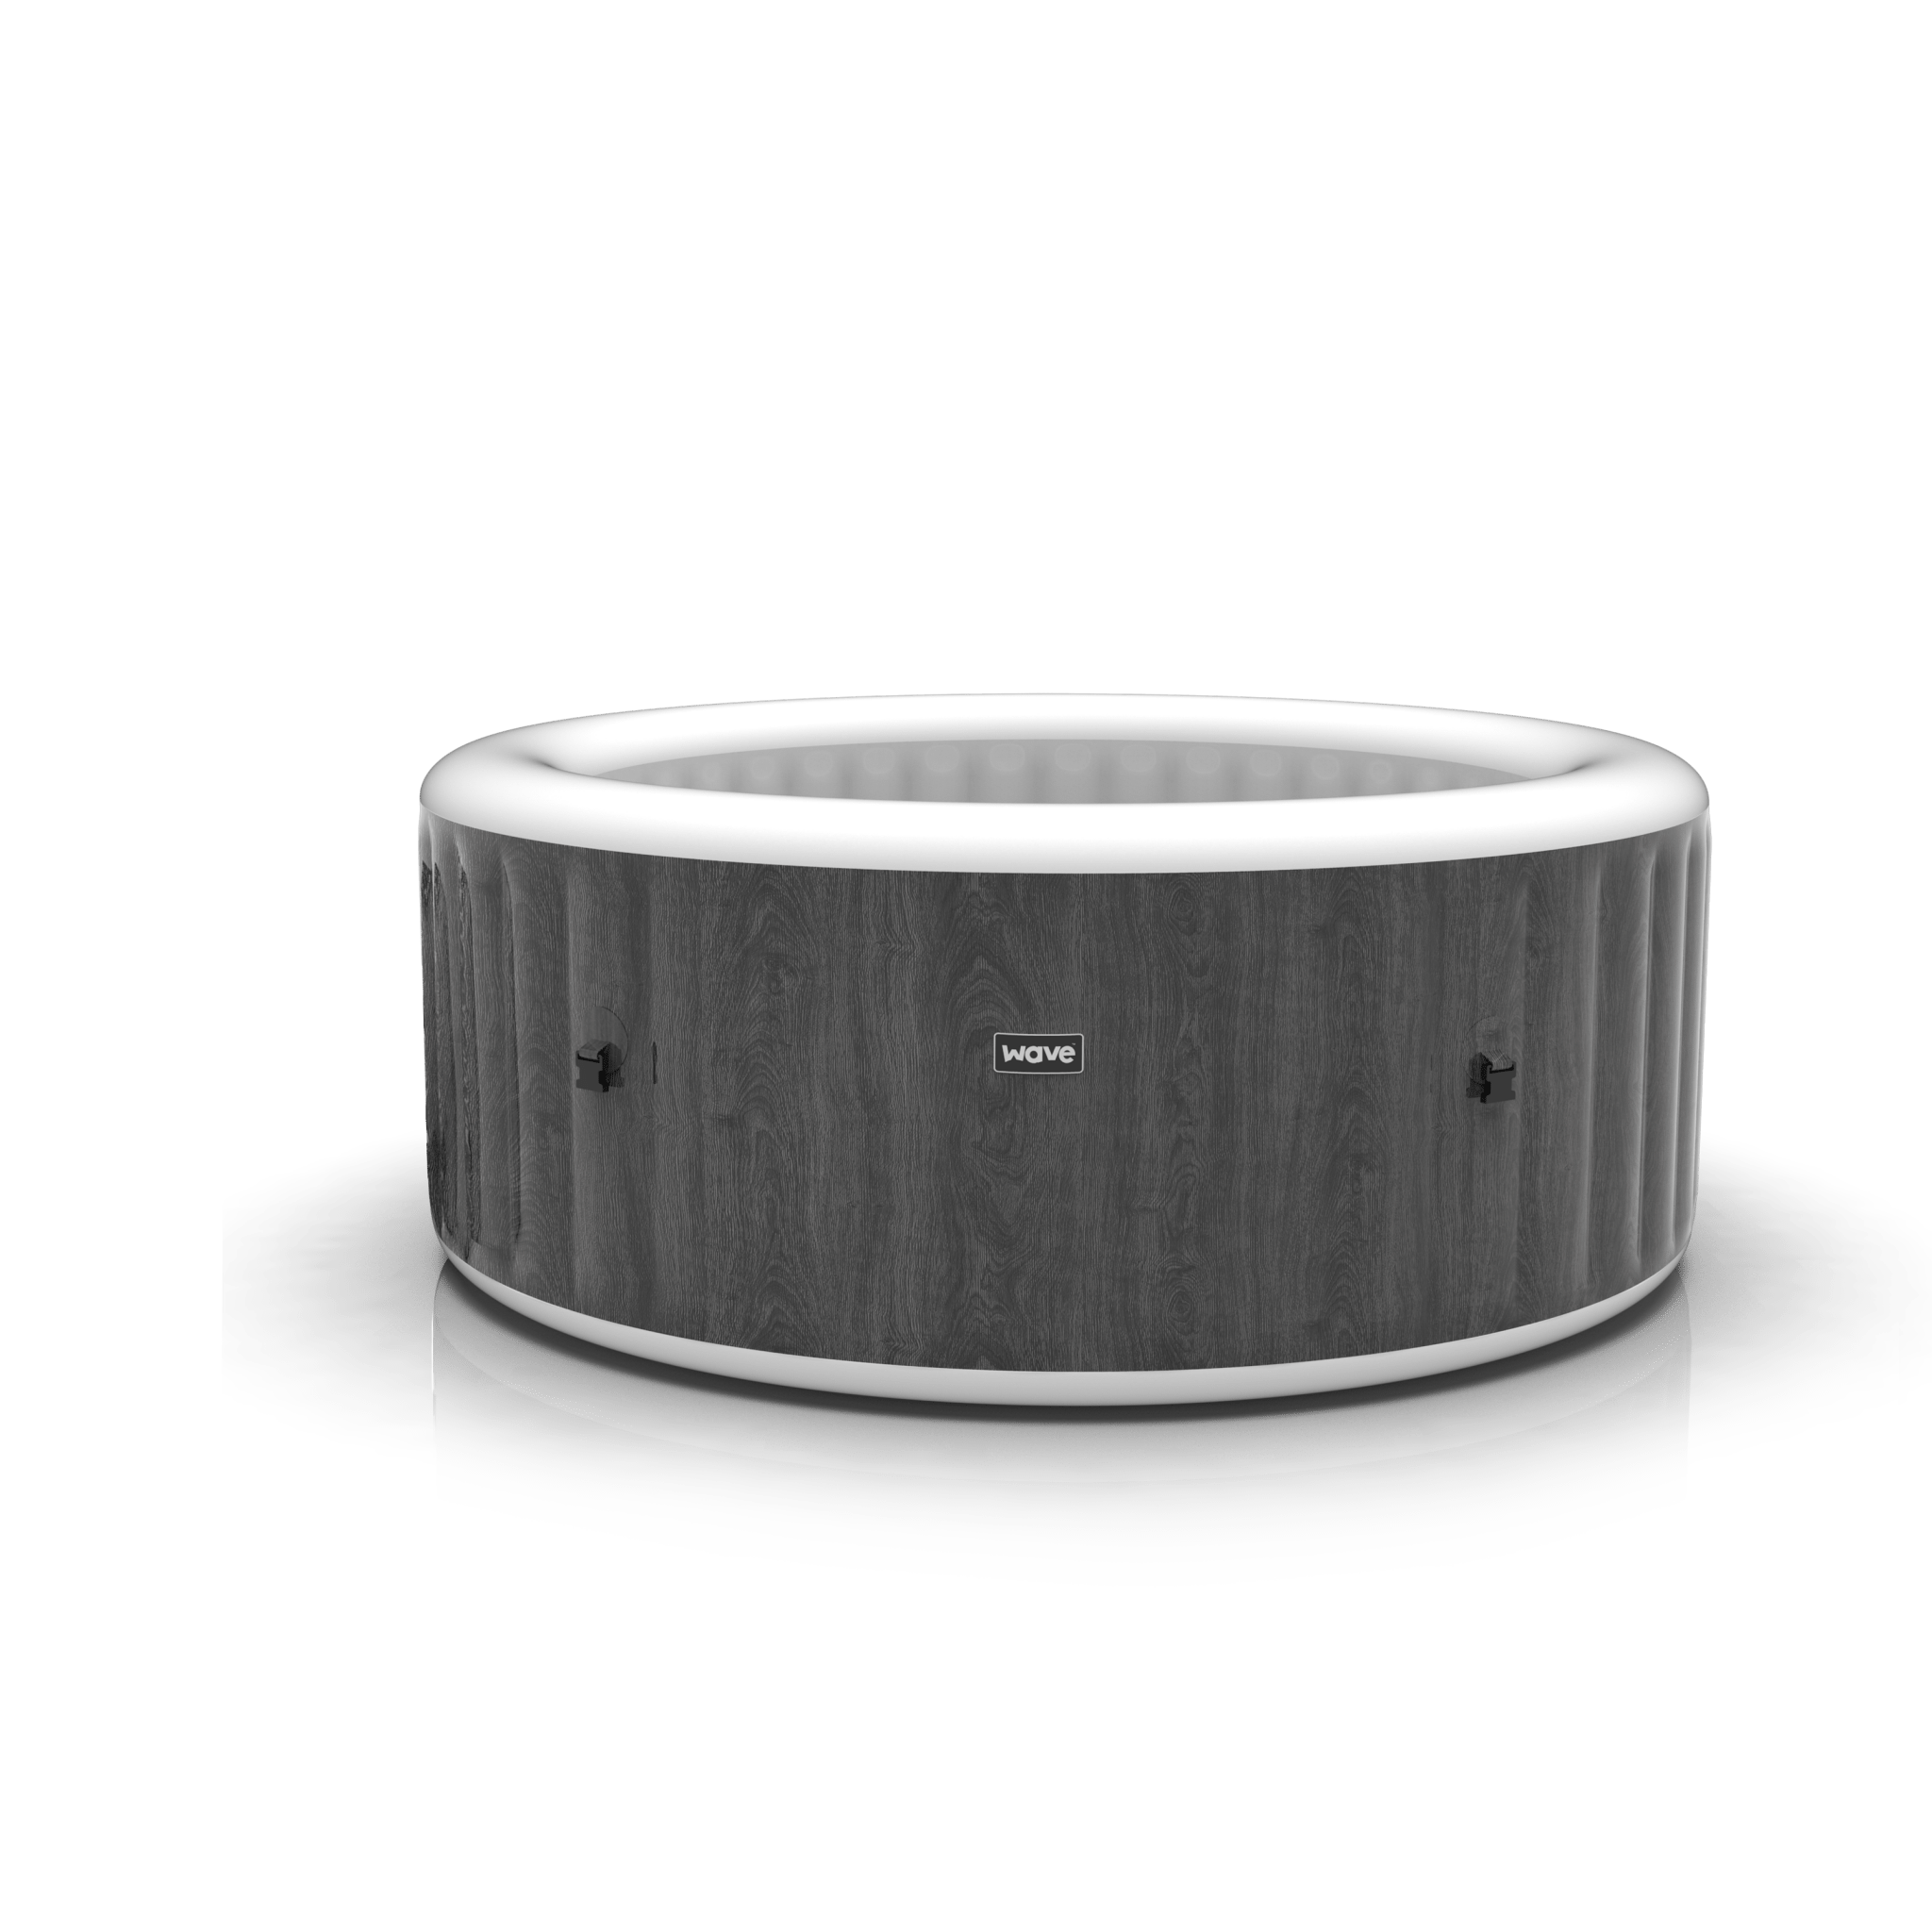 Wave Spa Atlantic 4 Person Grey Wood External Liner - Body Replacement - Hot Tub Liner - Wave Spas USA